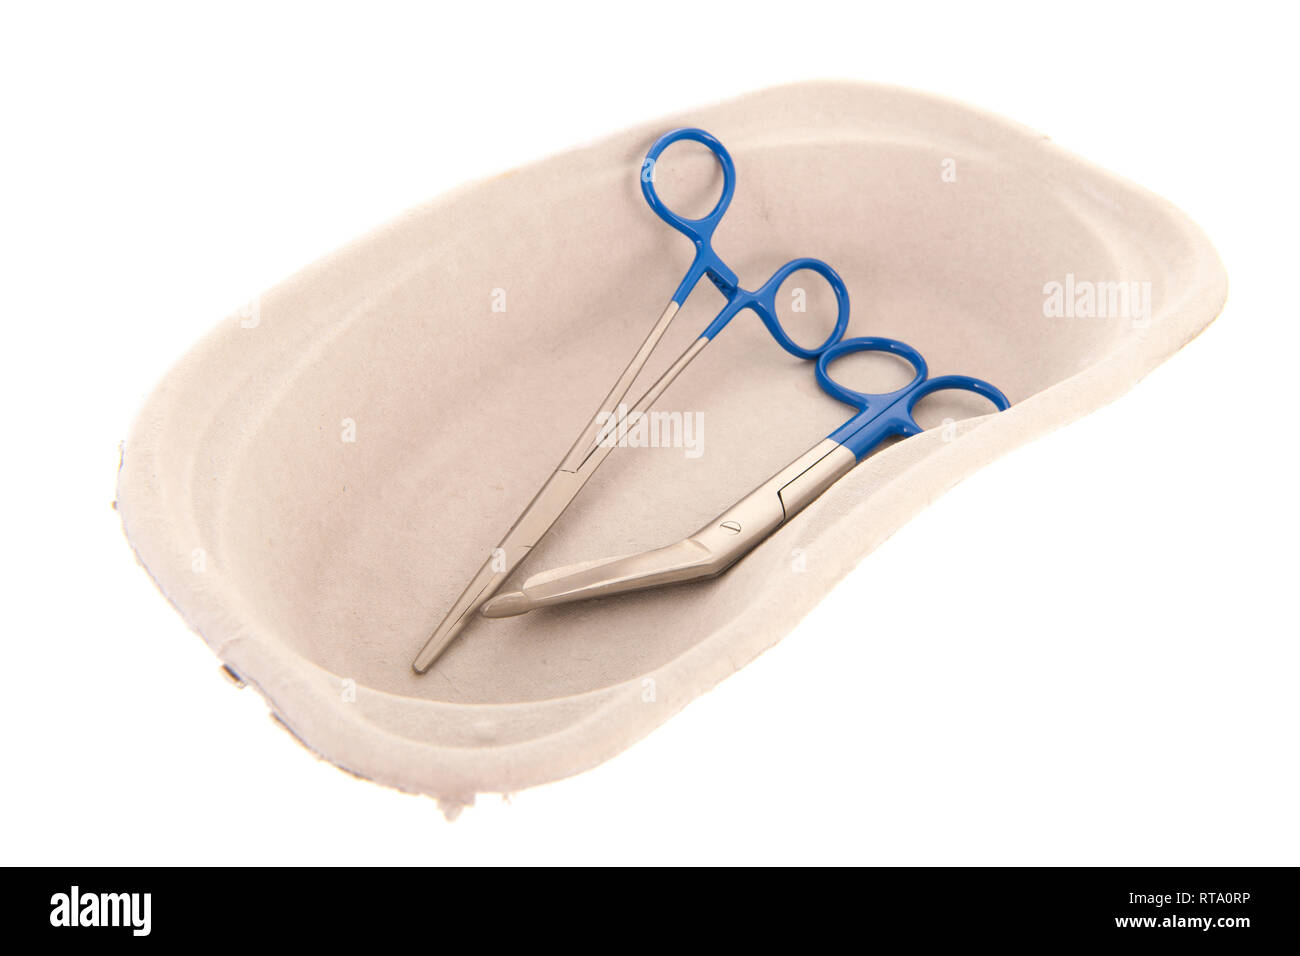 Medical scissors in renal pelvis carton box isolated over white background Stock Photo